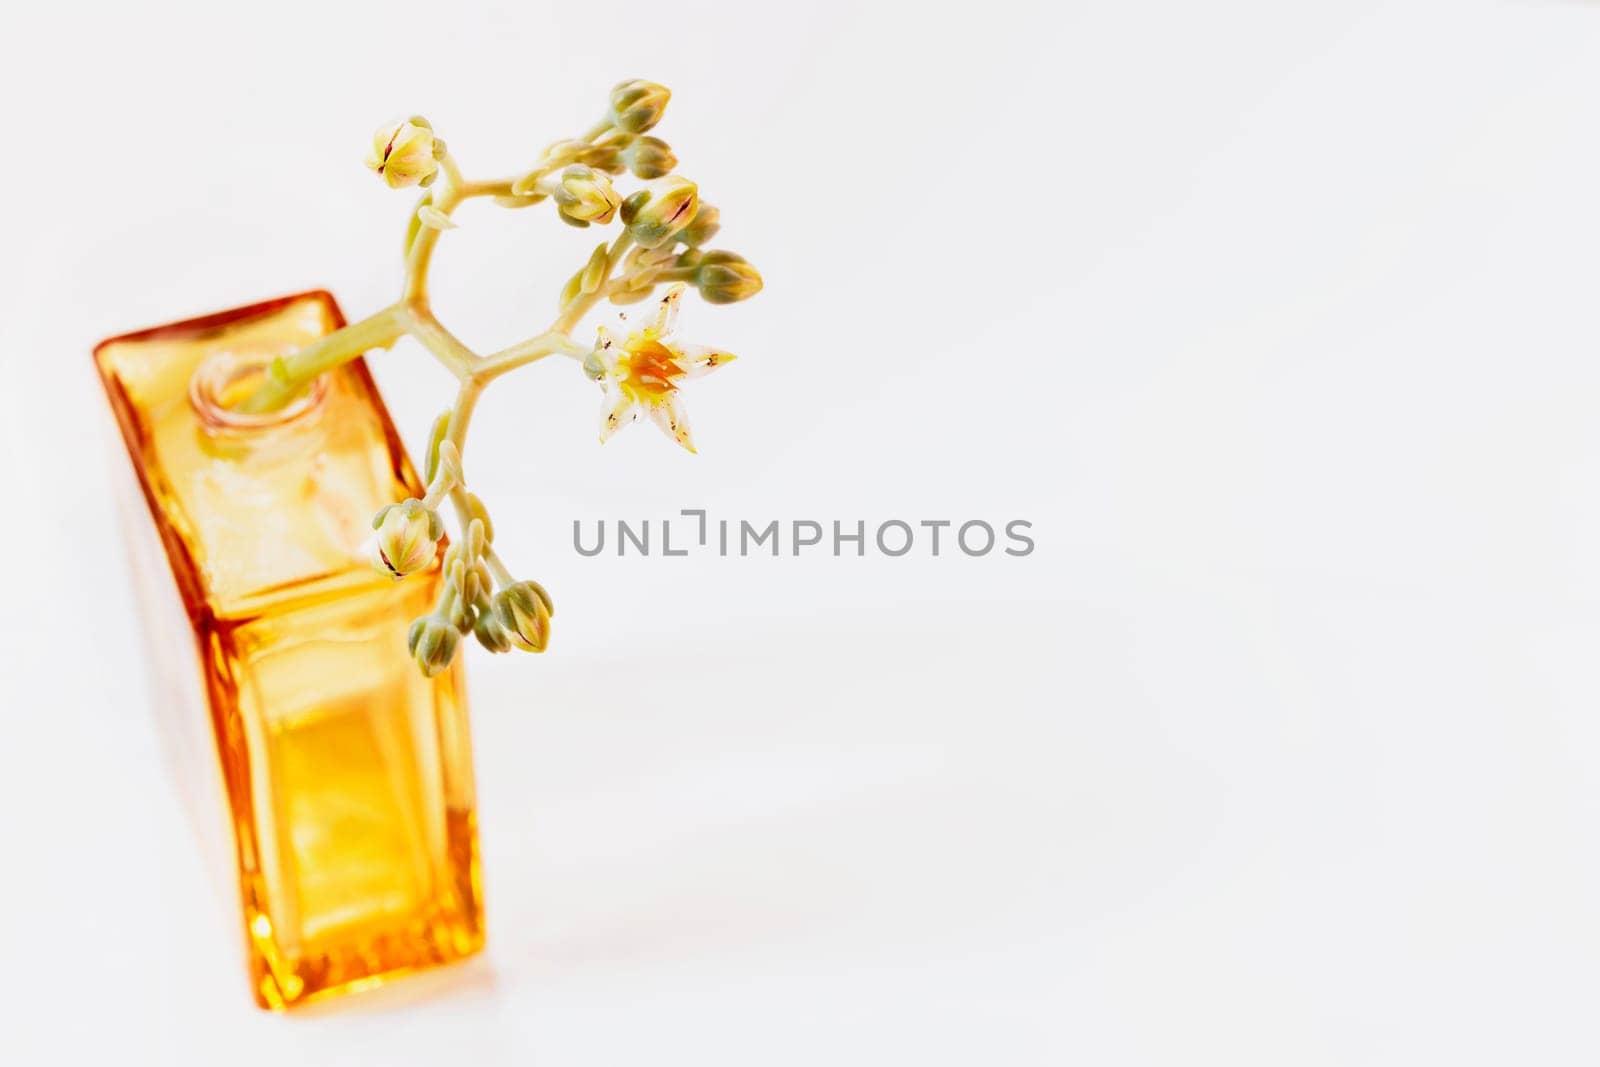 Detail of succulent plant graptopetalum common named ghost plant or mother-of-pearl with small flowers in glass vase on white background